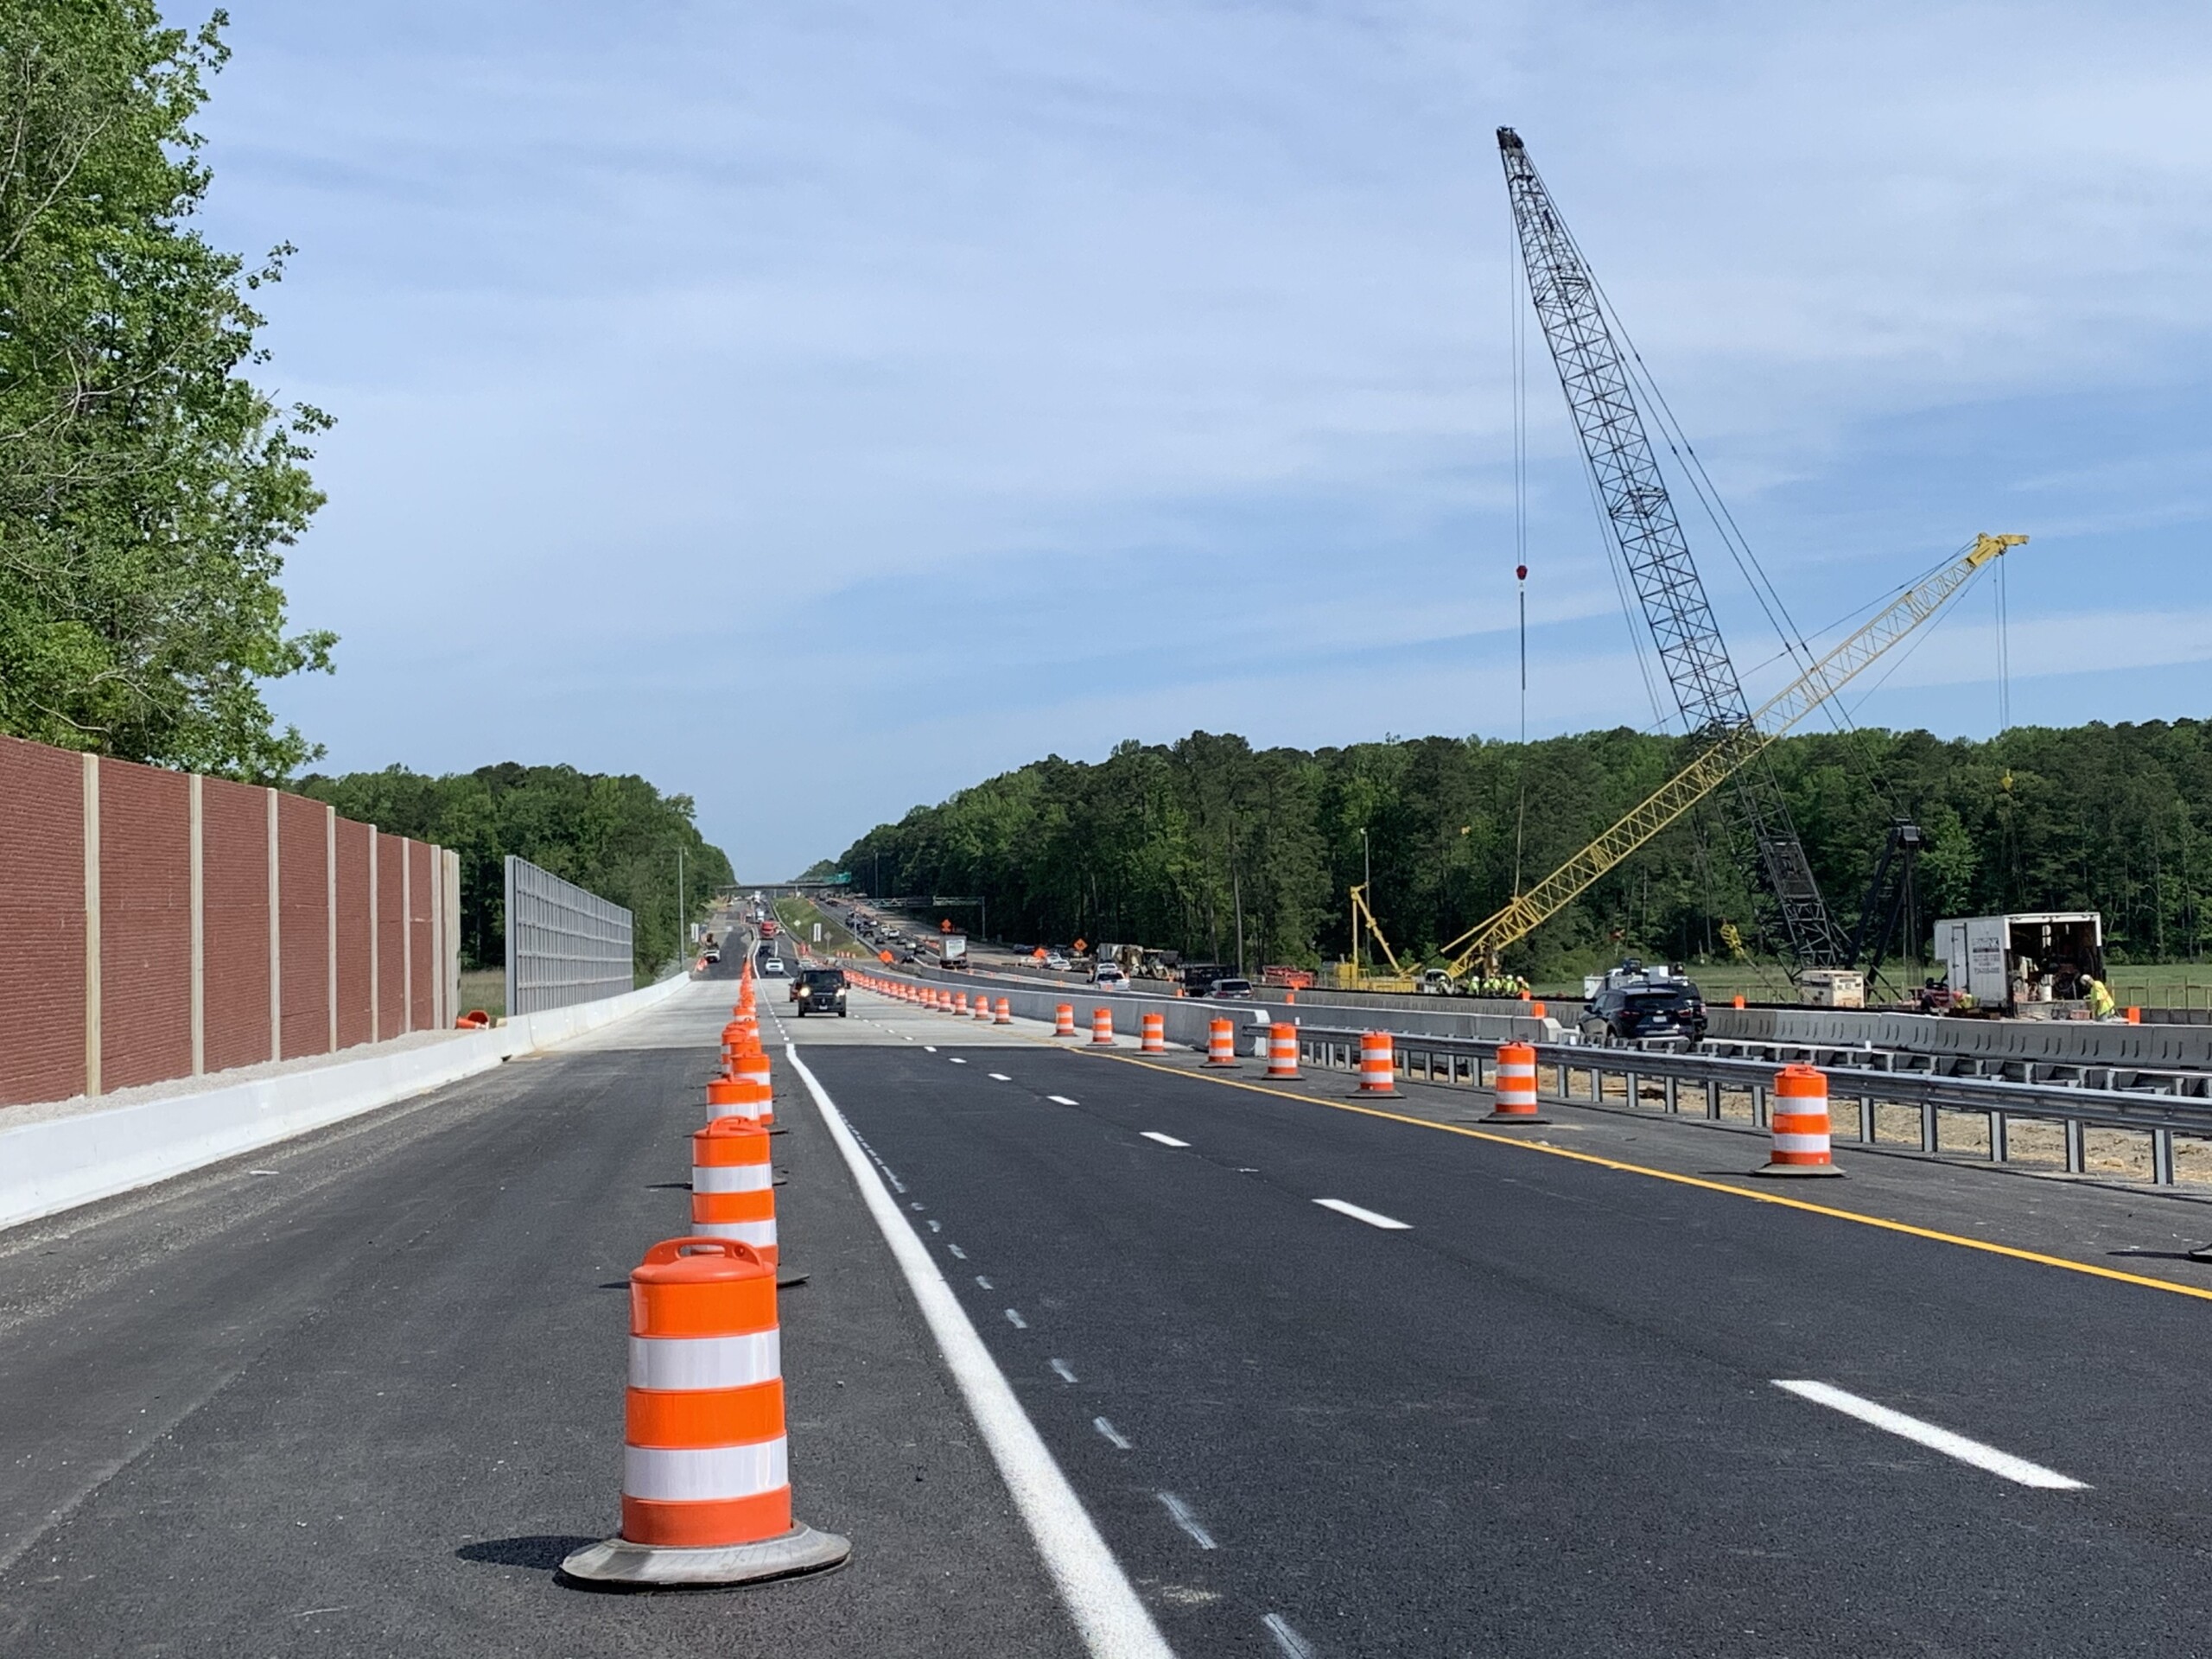 Transparent Ready-Fit Panels on Queen's Creek bridge in York County, Virginia.